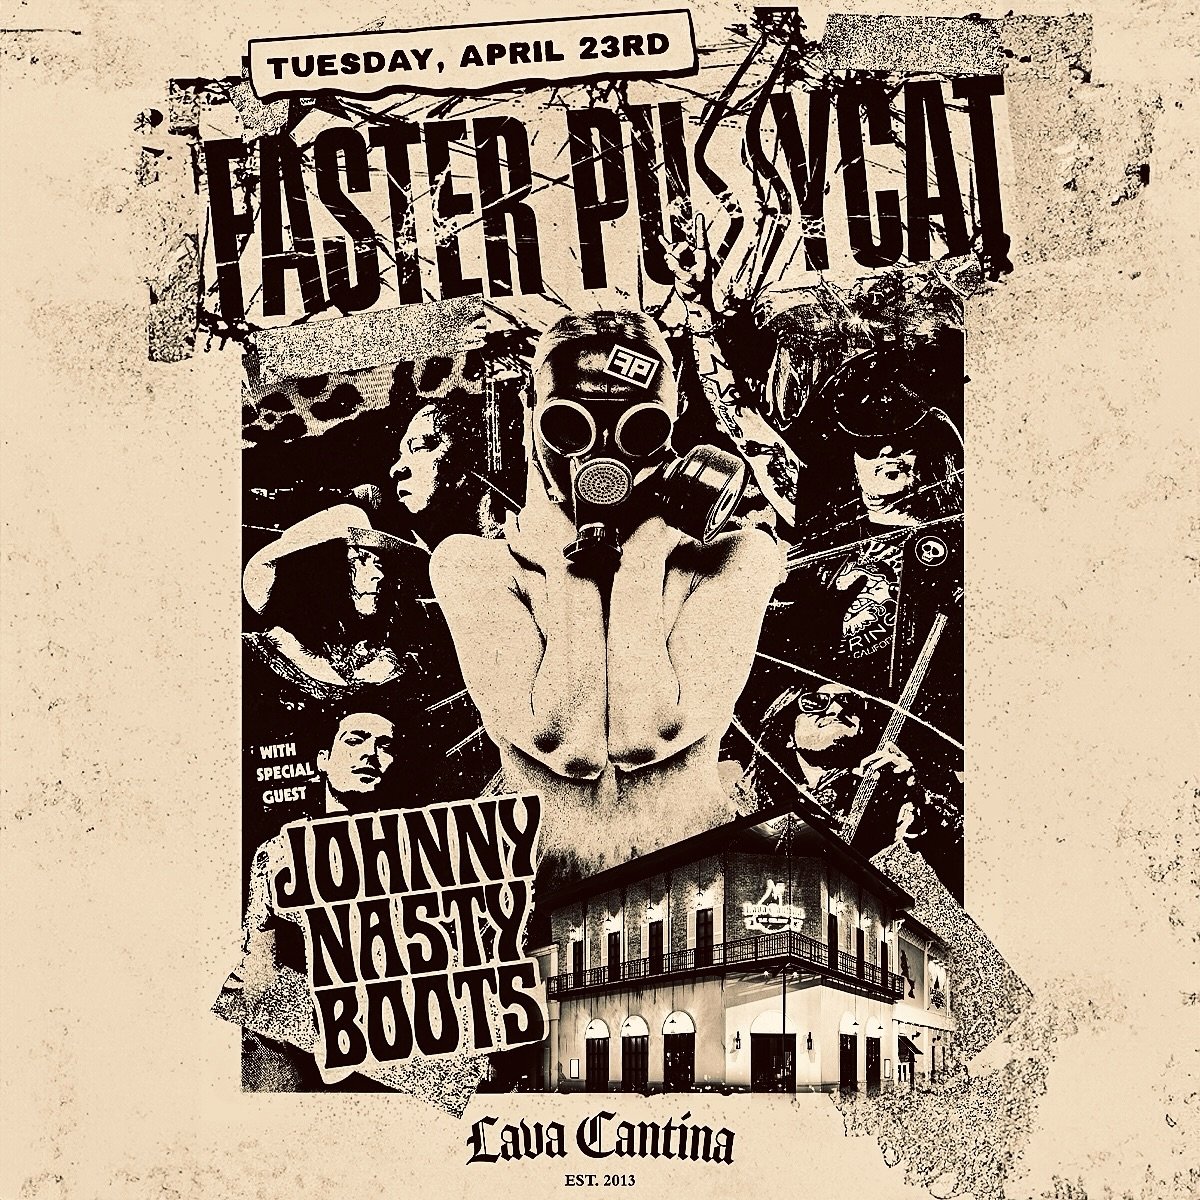 🔥 Faster Pussycat @lavacantinatc on Tuesday, April 23rd starting at 7PM with special guest Johnny Nasty Boots! 🔥

🎟️🎟️➡️ LavaCantina.com

👀 General Admission for this show is CHARGED. Reserved seating on our VIP Patio and Balcony is available fo